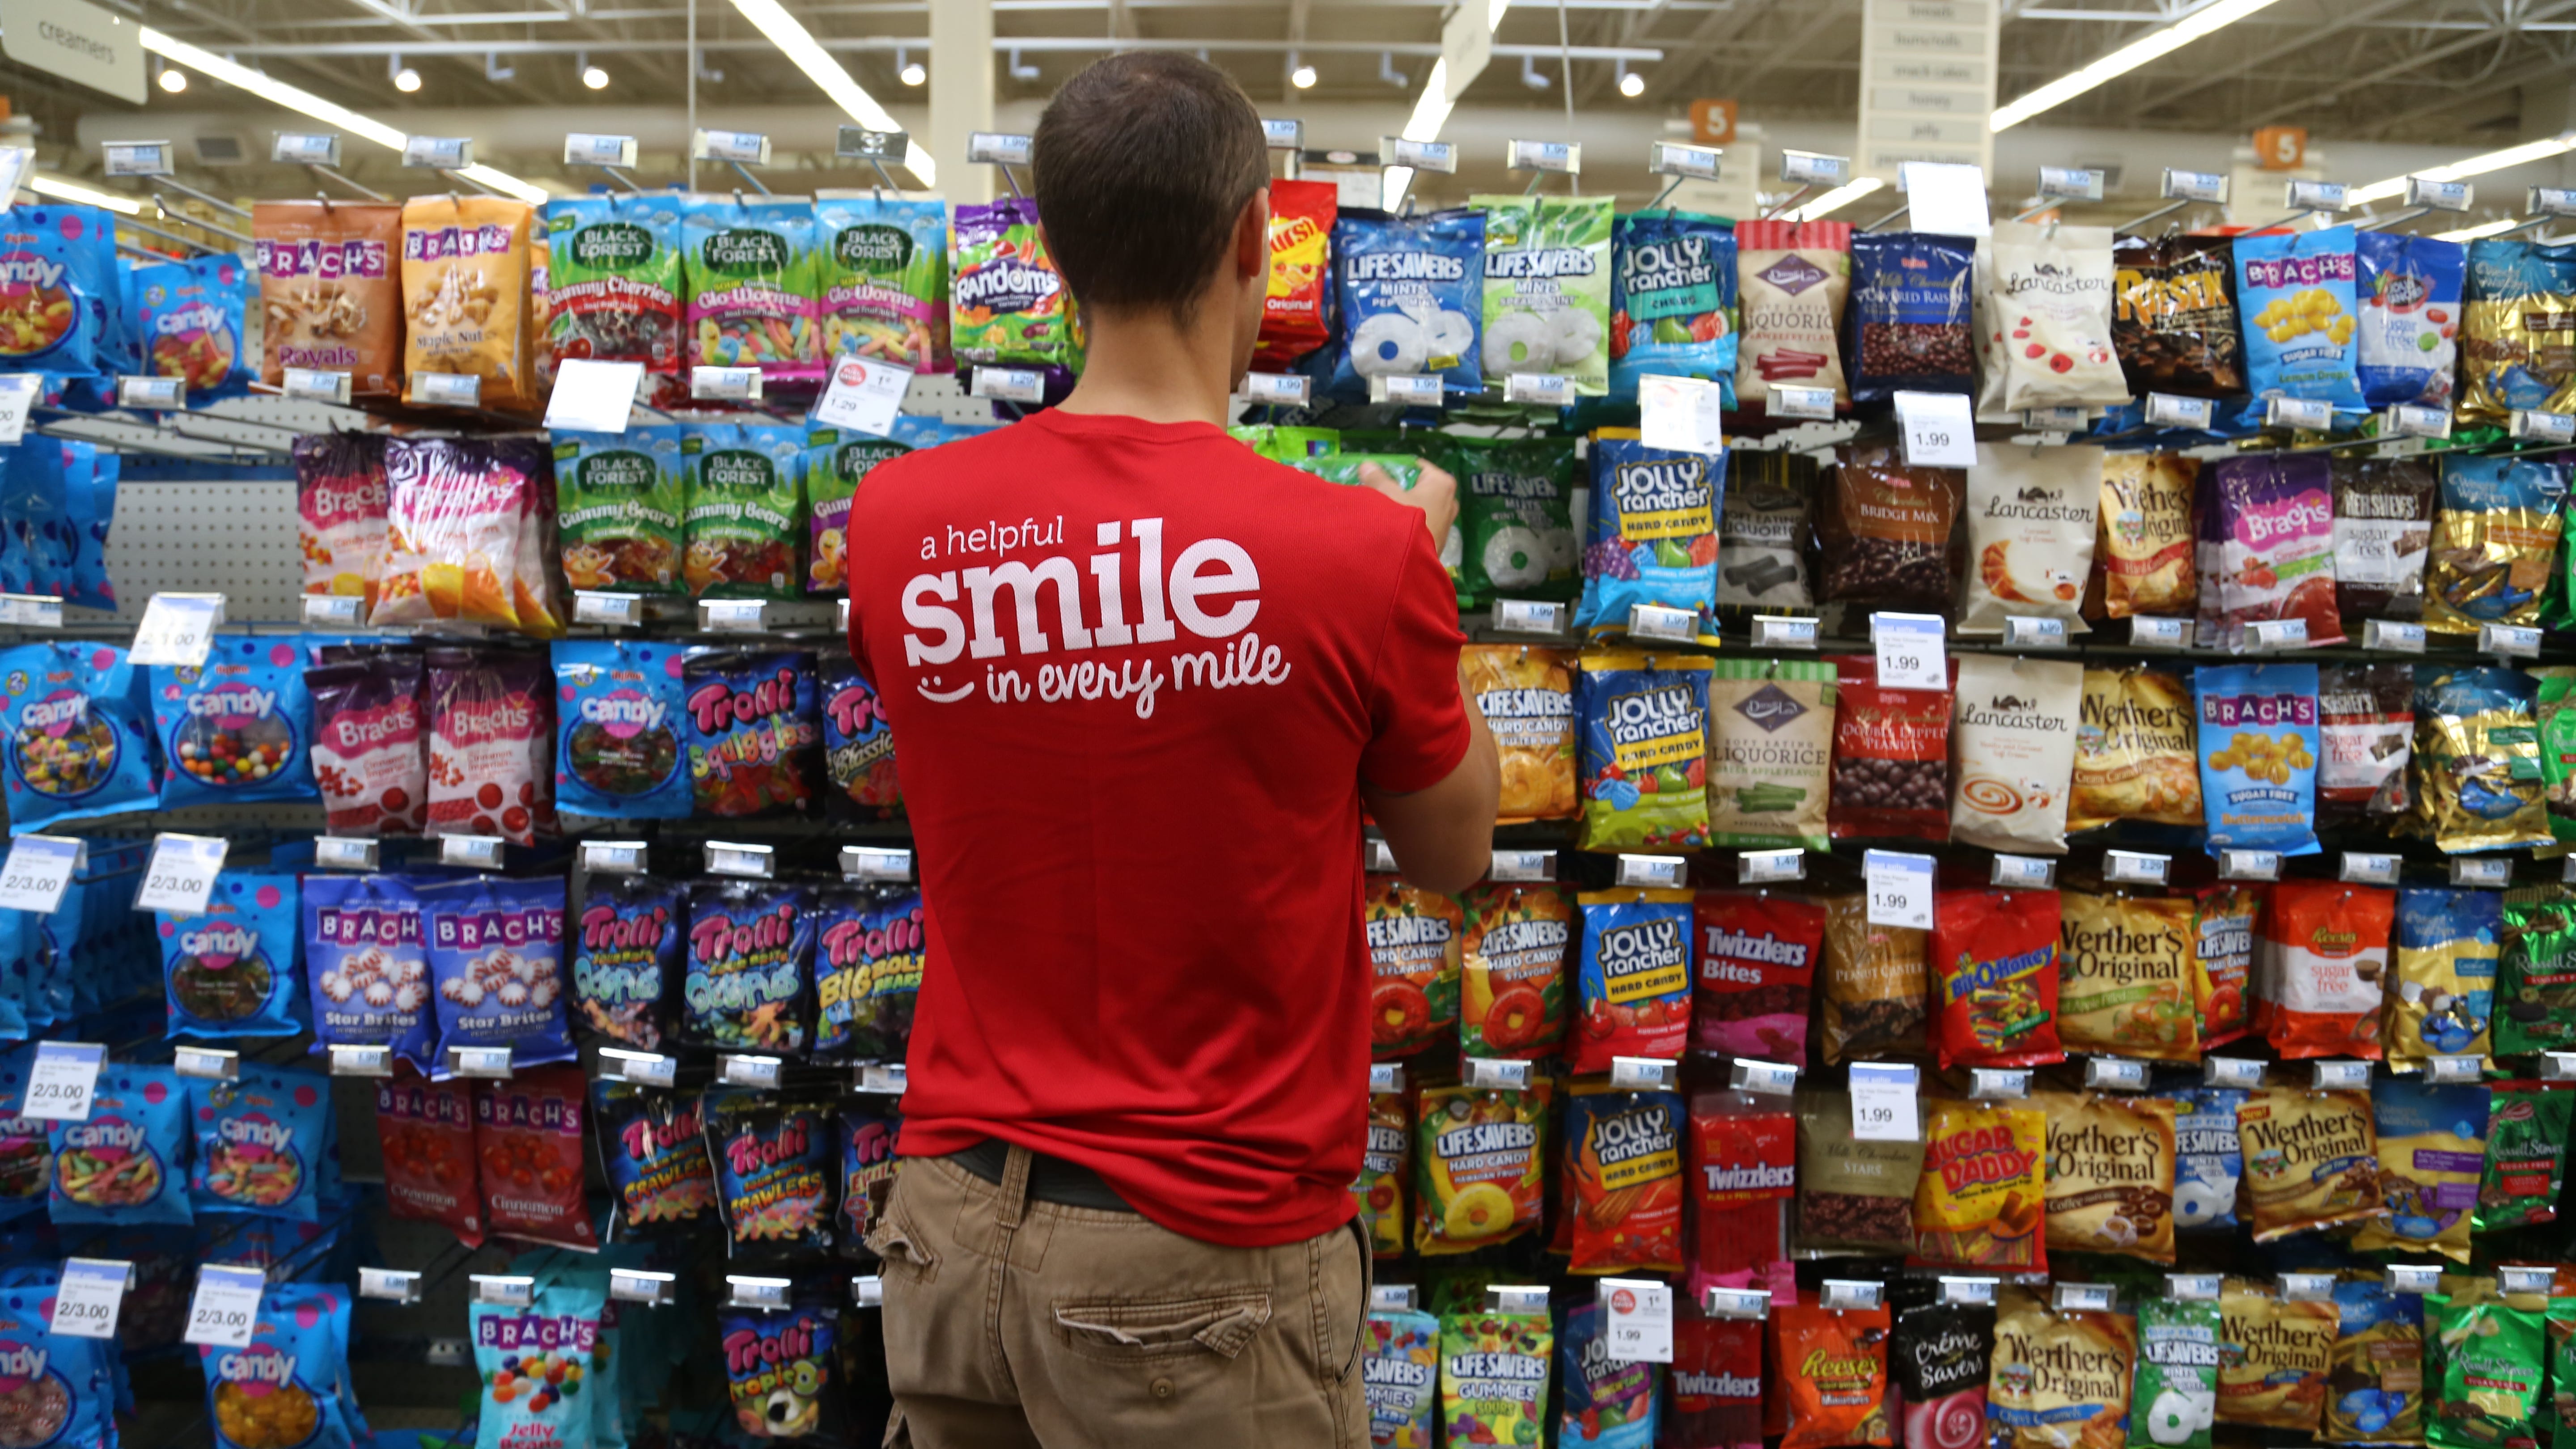 From the archives: Hy-Vee's 'A helpful smile' jingle turns 50. Do you remember the words?